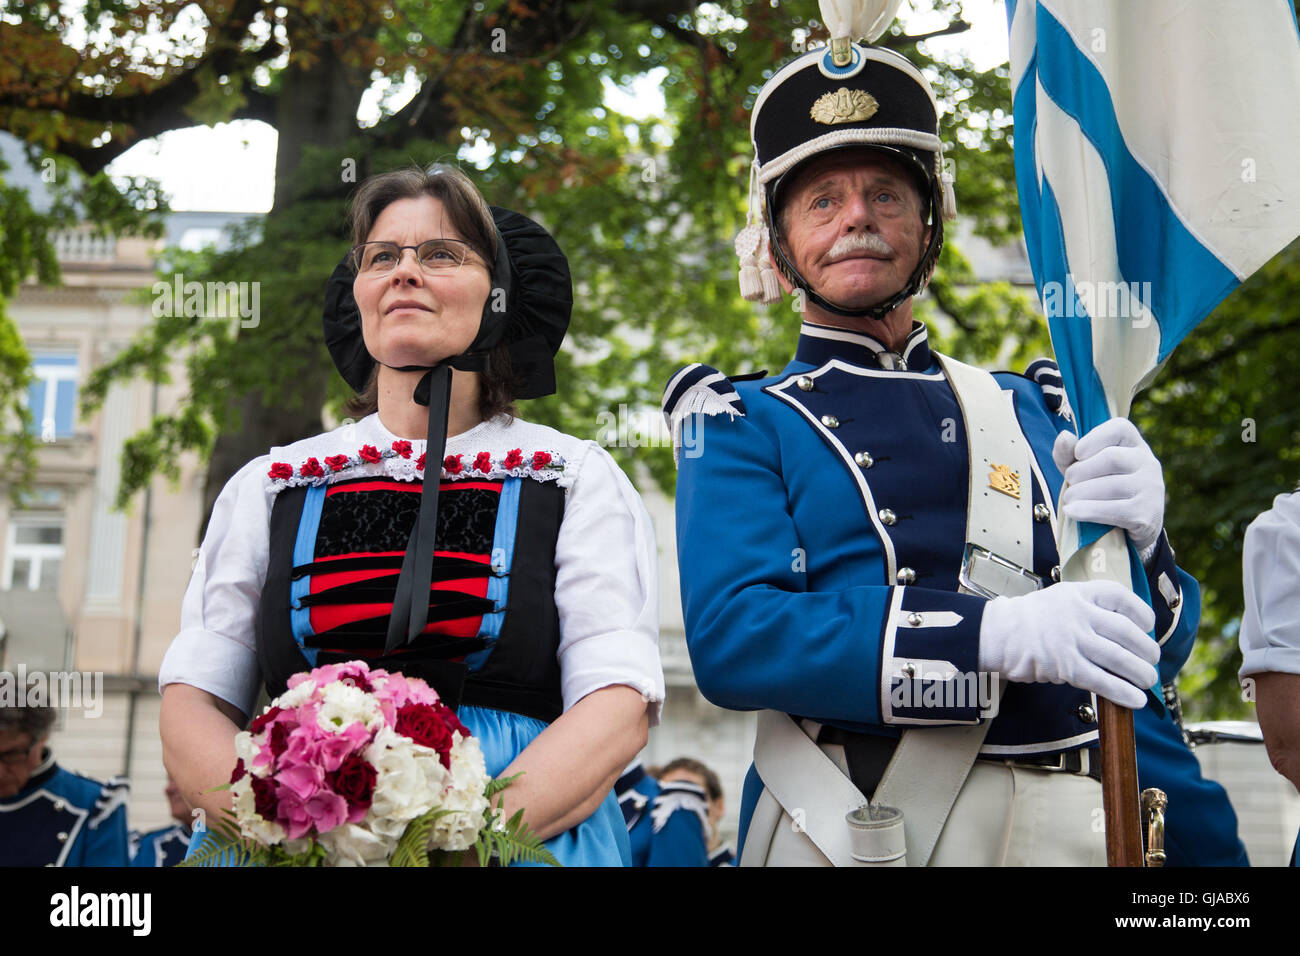 Men and women wear traditional dress at a ceremony in Zurich in celebration of Swiss National Day. Stock Photo